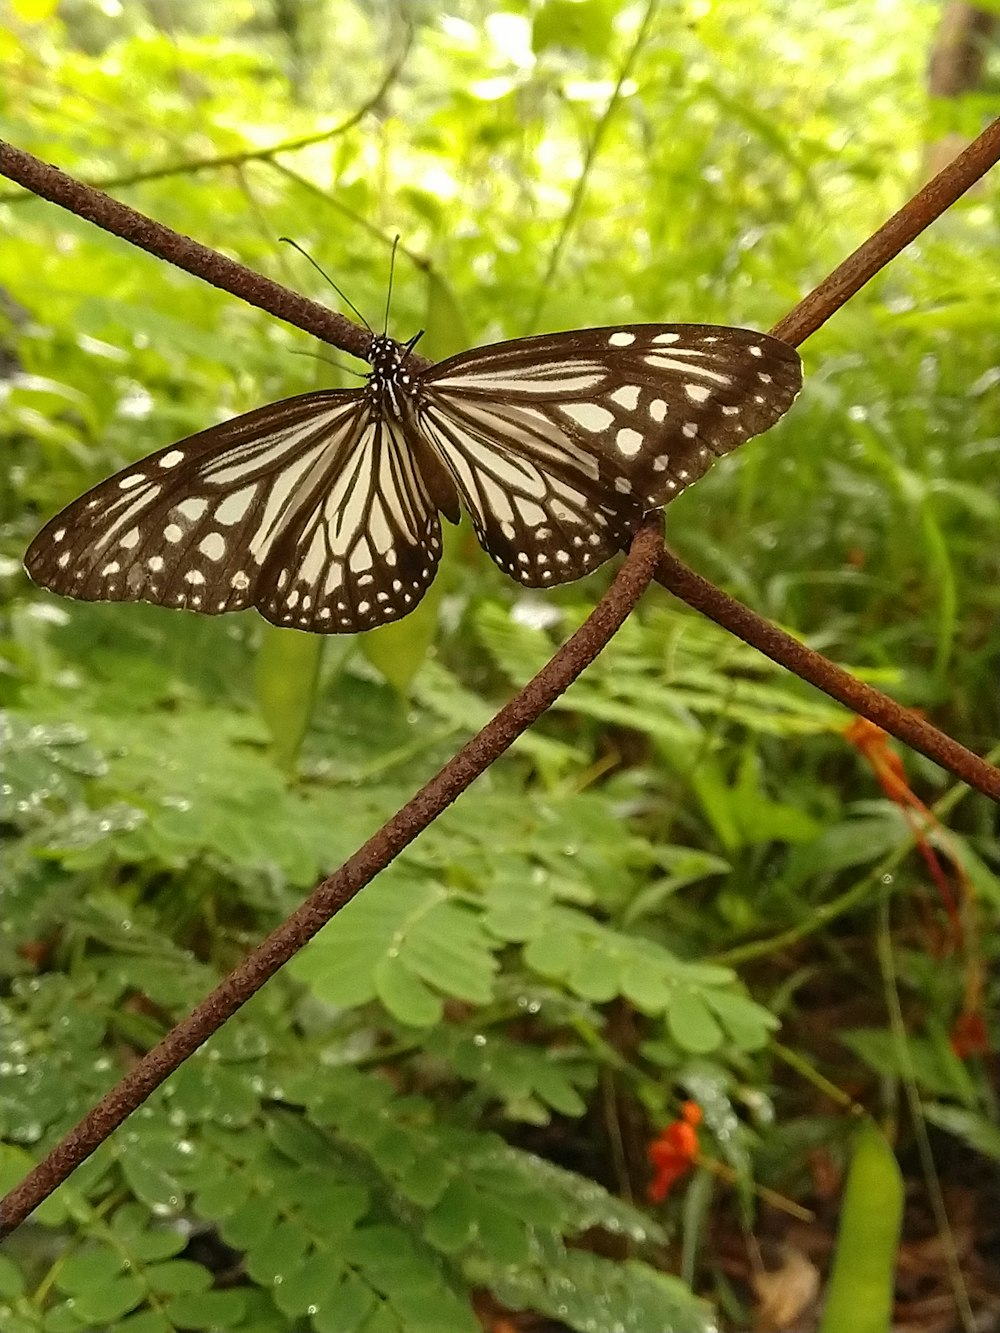 black and white butterfly perched on green leaf plant during daytime